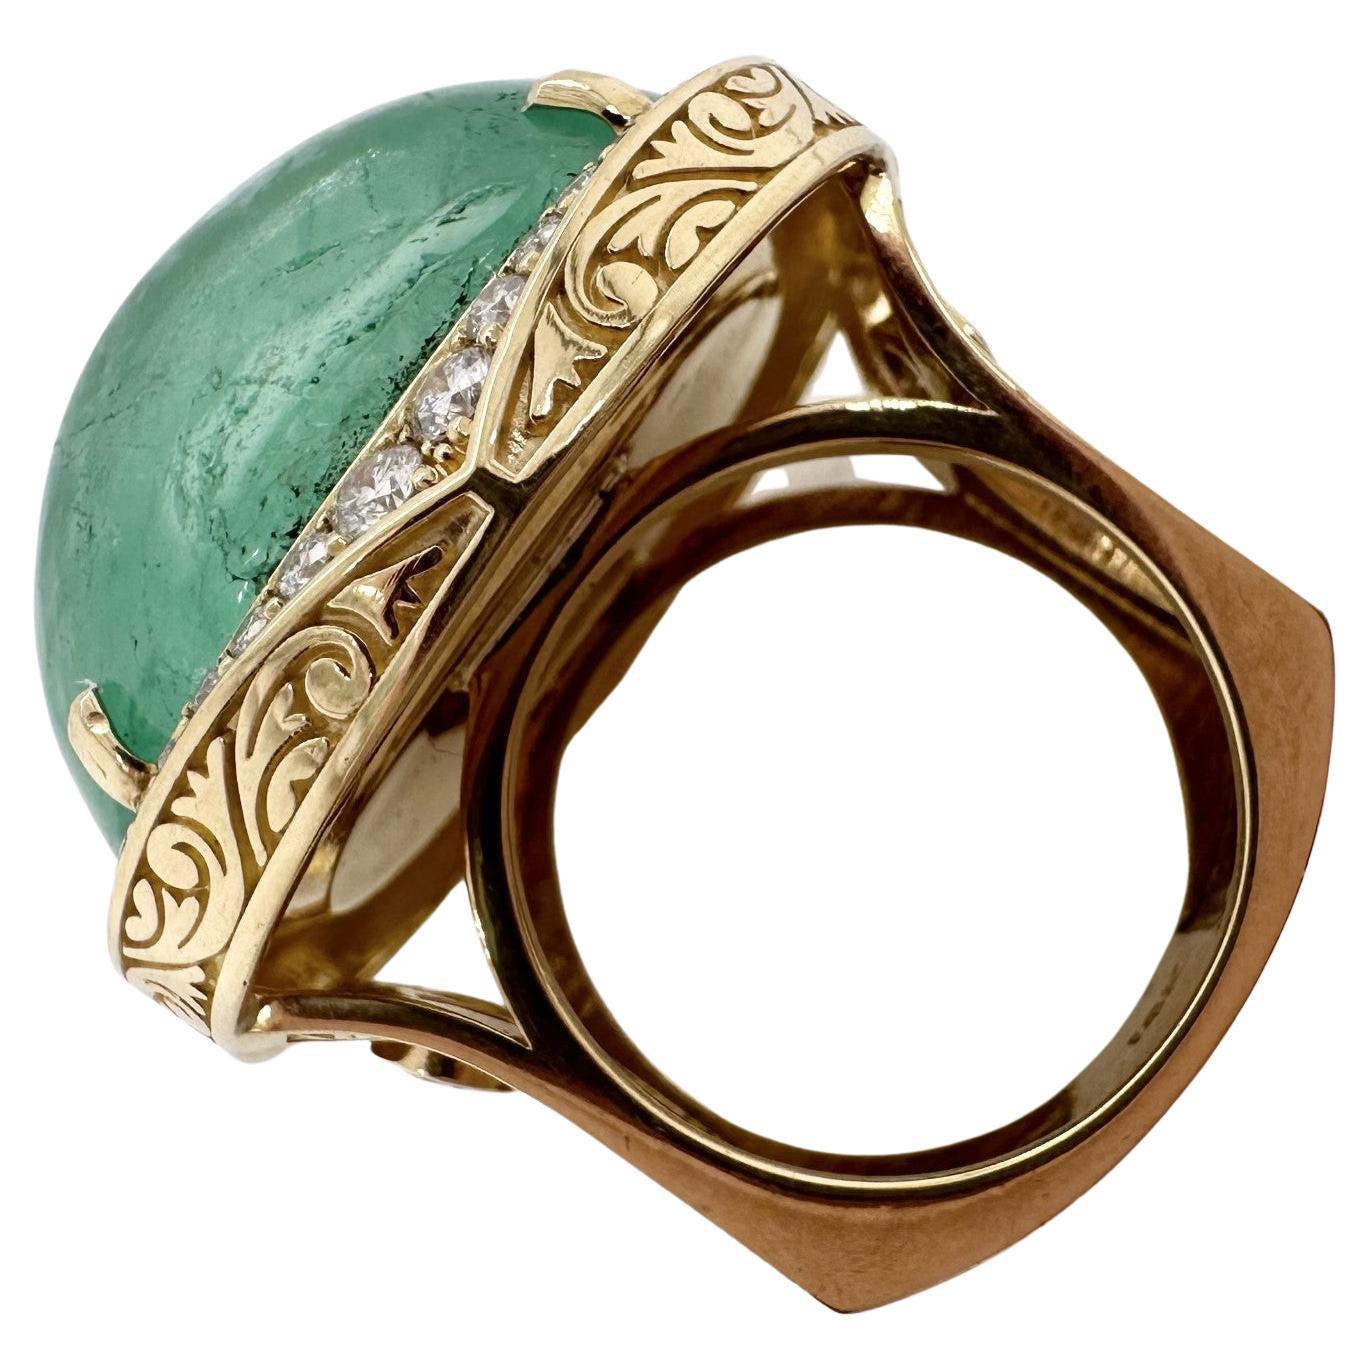 Rare emerald cabochon 100% naturl and untreated made in a complex cocktail ring in 18KT yellow gold with lots of small details, exquisite workmanship, VS diamonds and hand finsih throughout. This is a one of a kind ring that will get tons of